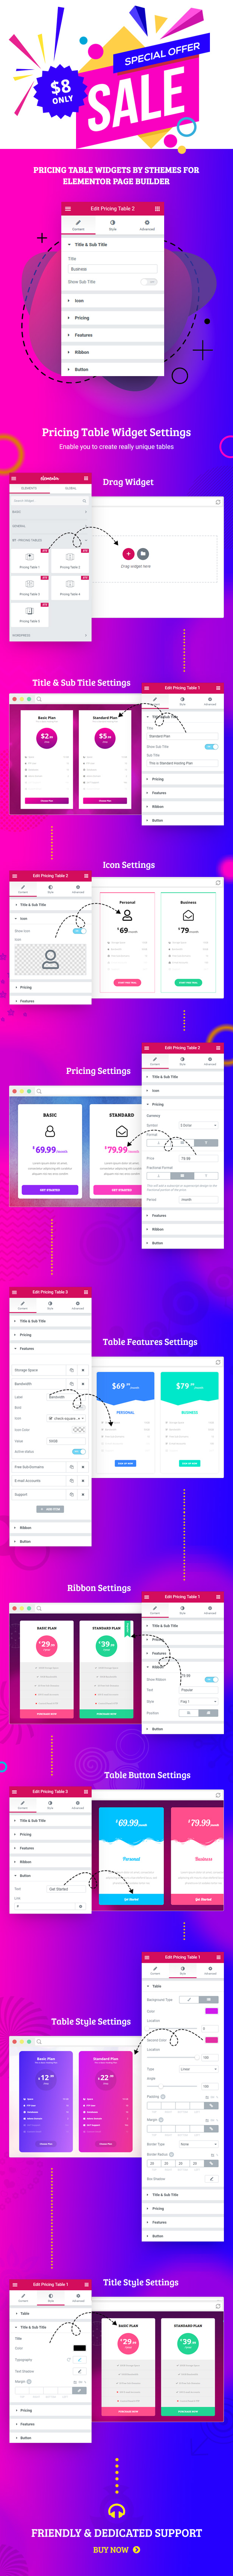 Pricing Table Widgets by SThemes for Elementor Page builder